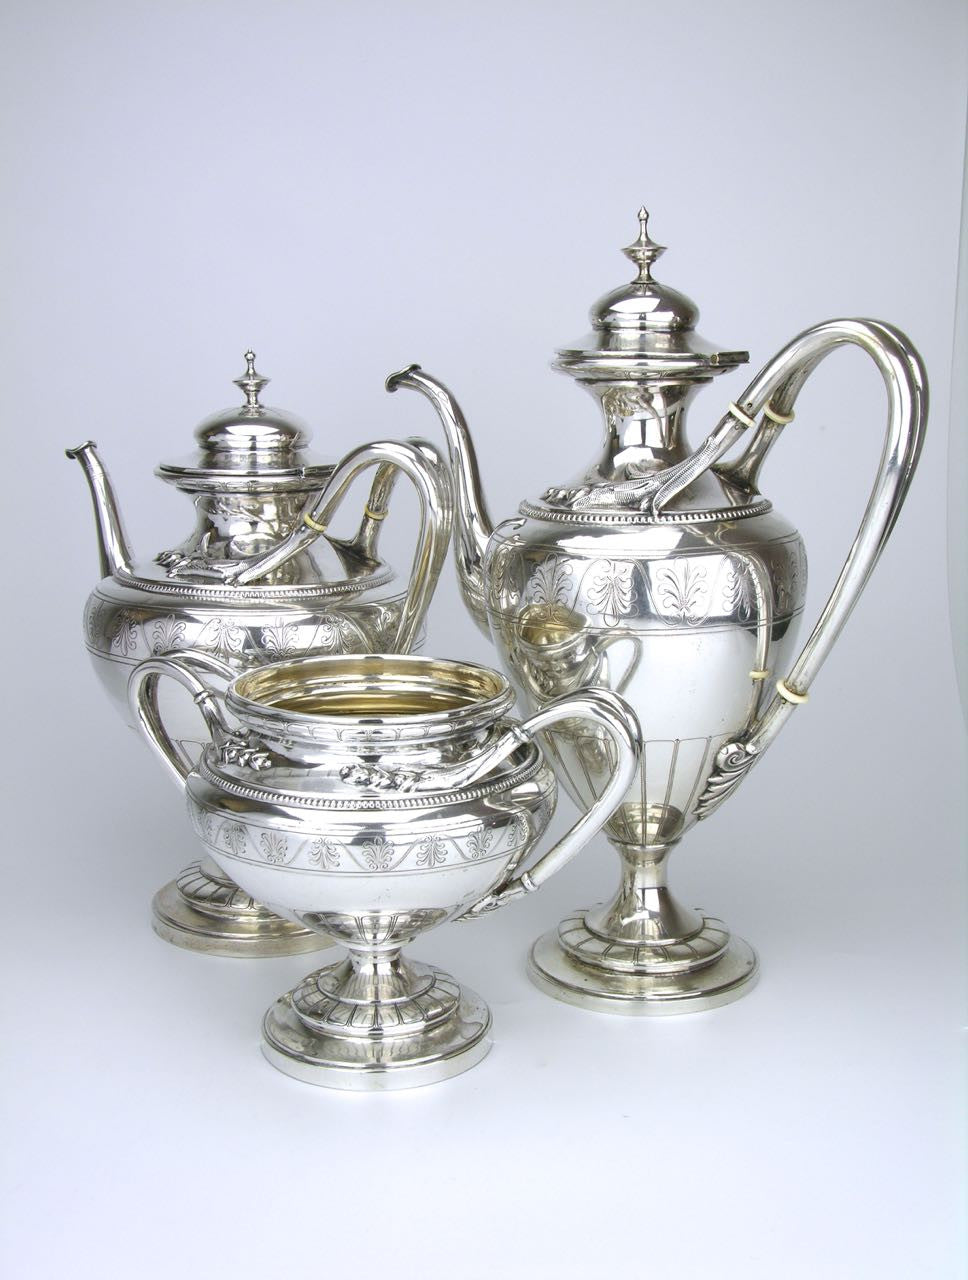 Antique Neoclassical Revival Continental Silver Tea and Coffee Service